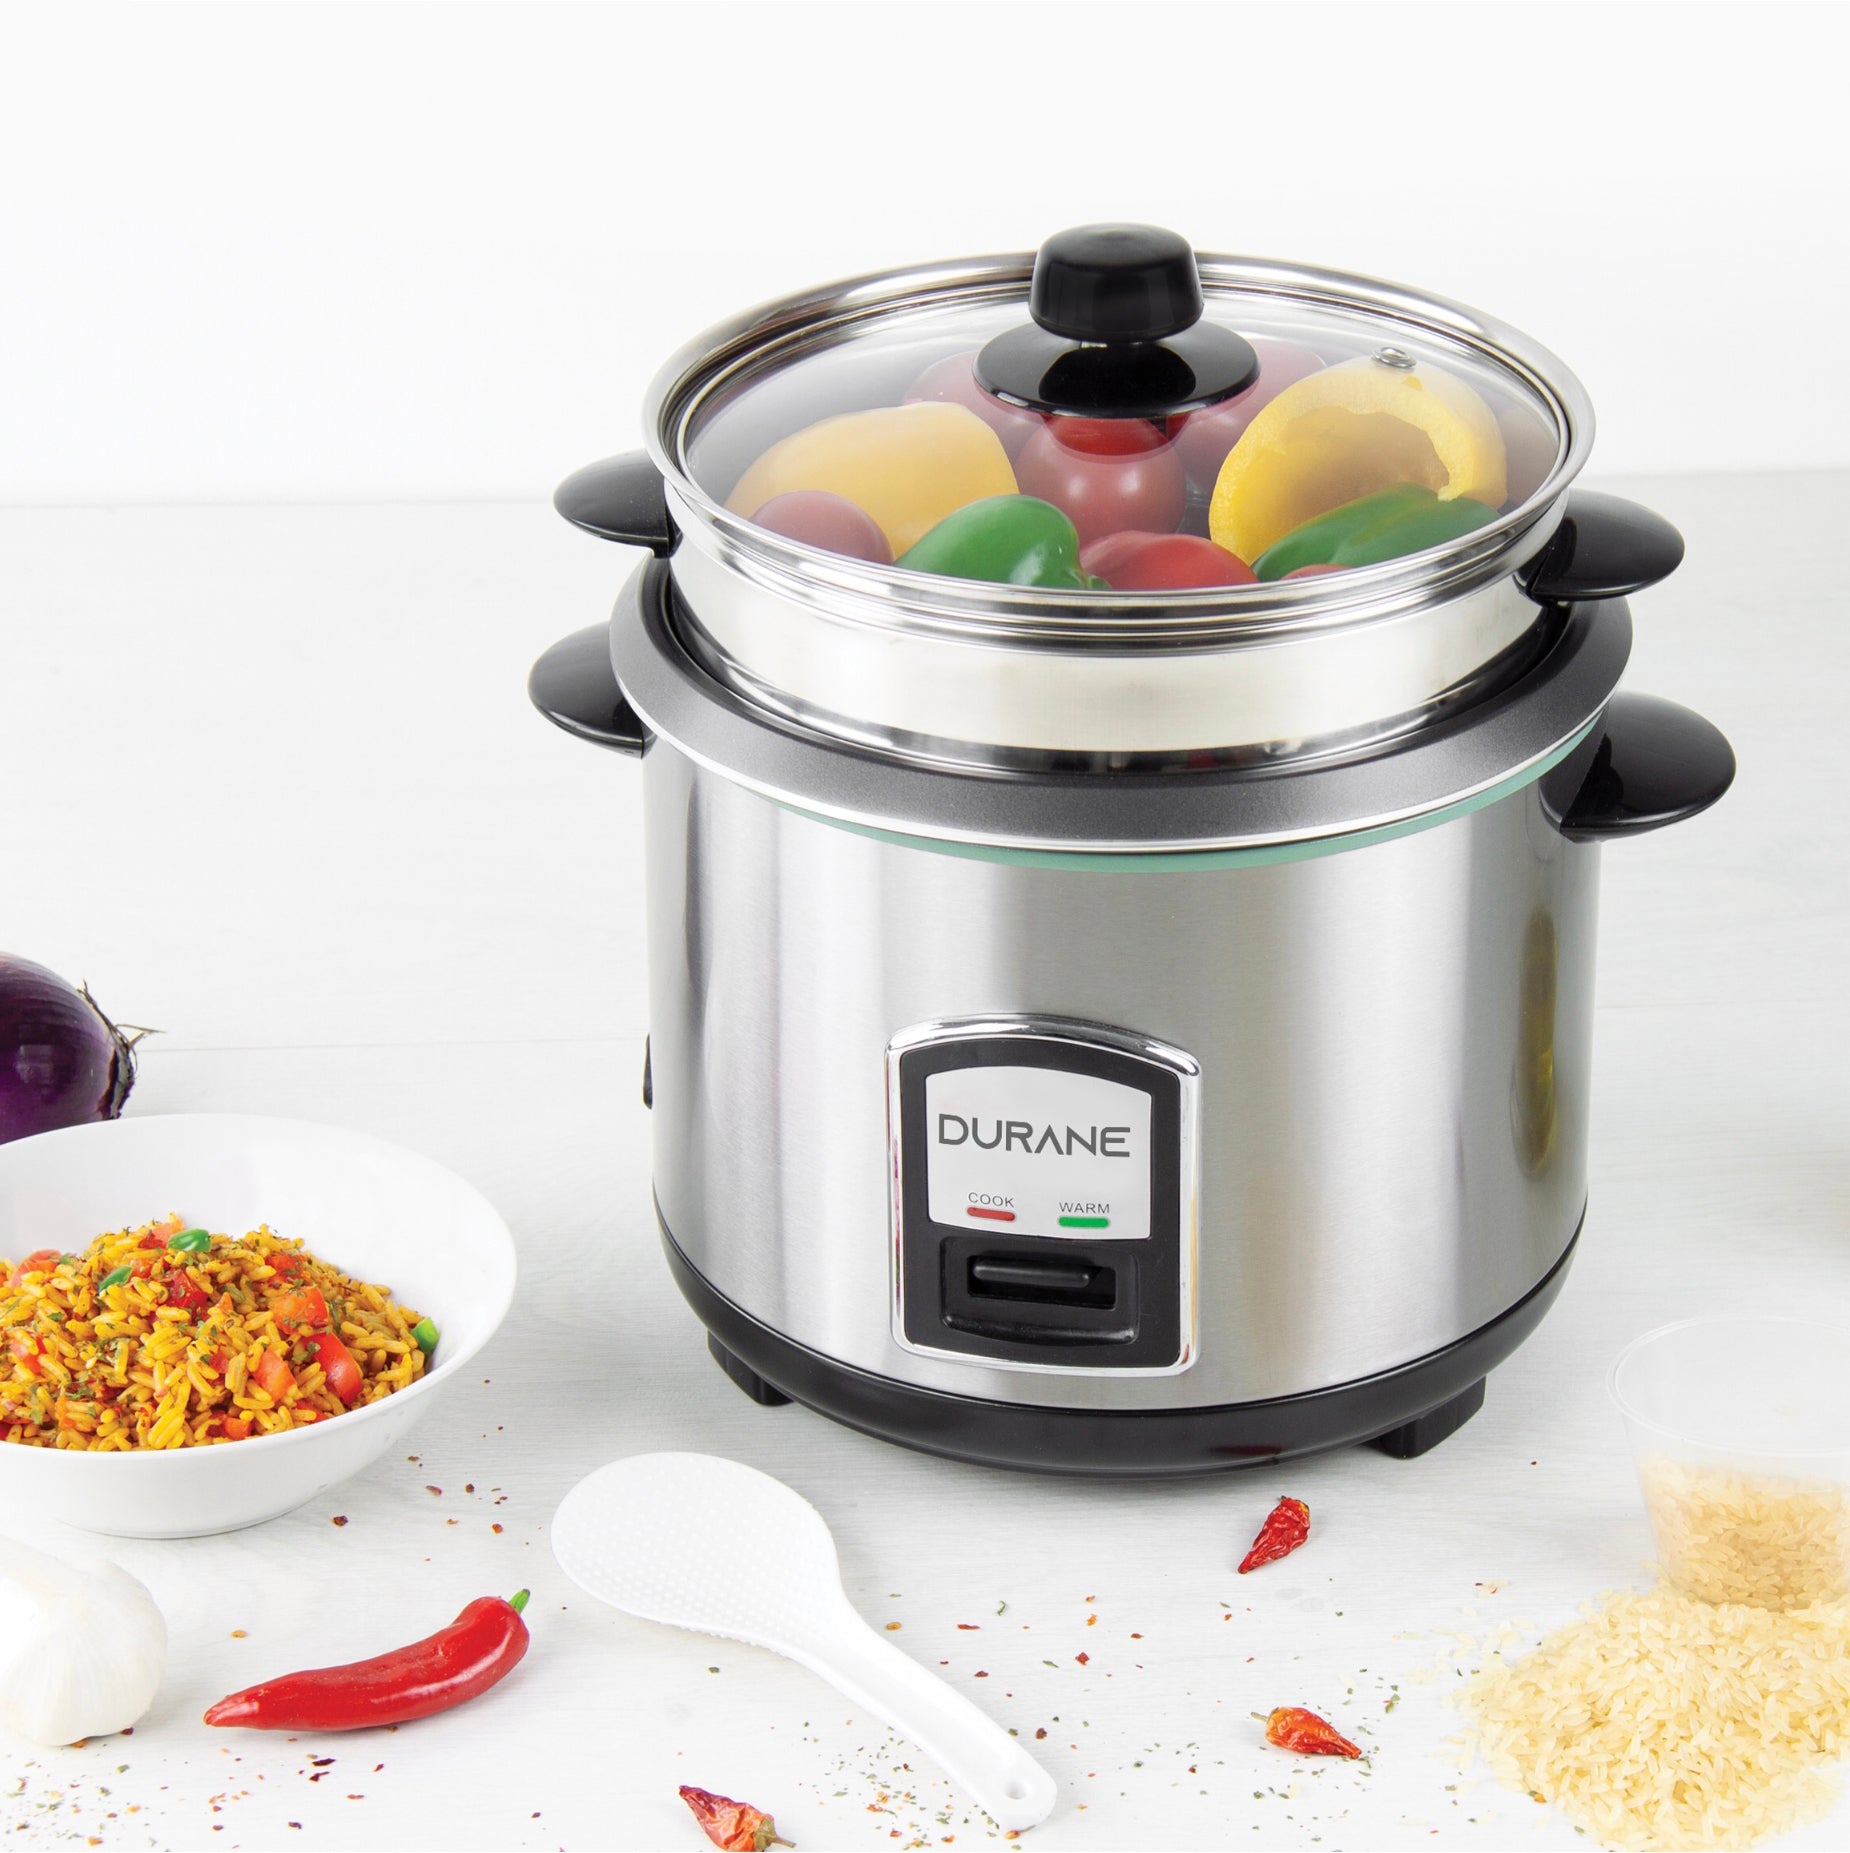 Durane Stainless Steel Rice Cooker and Steamer - 1.8L